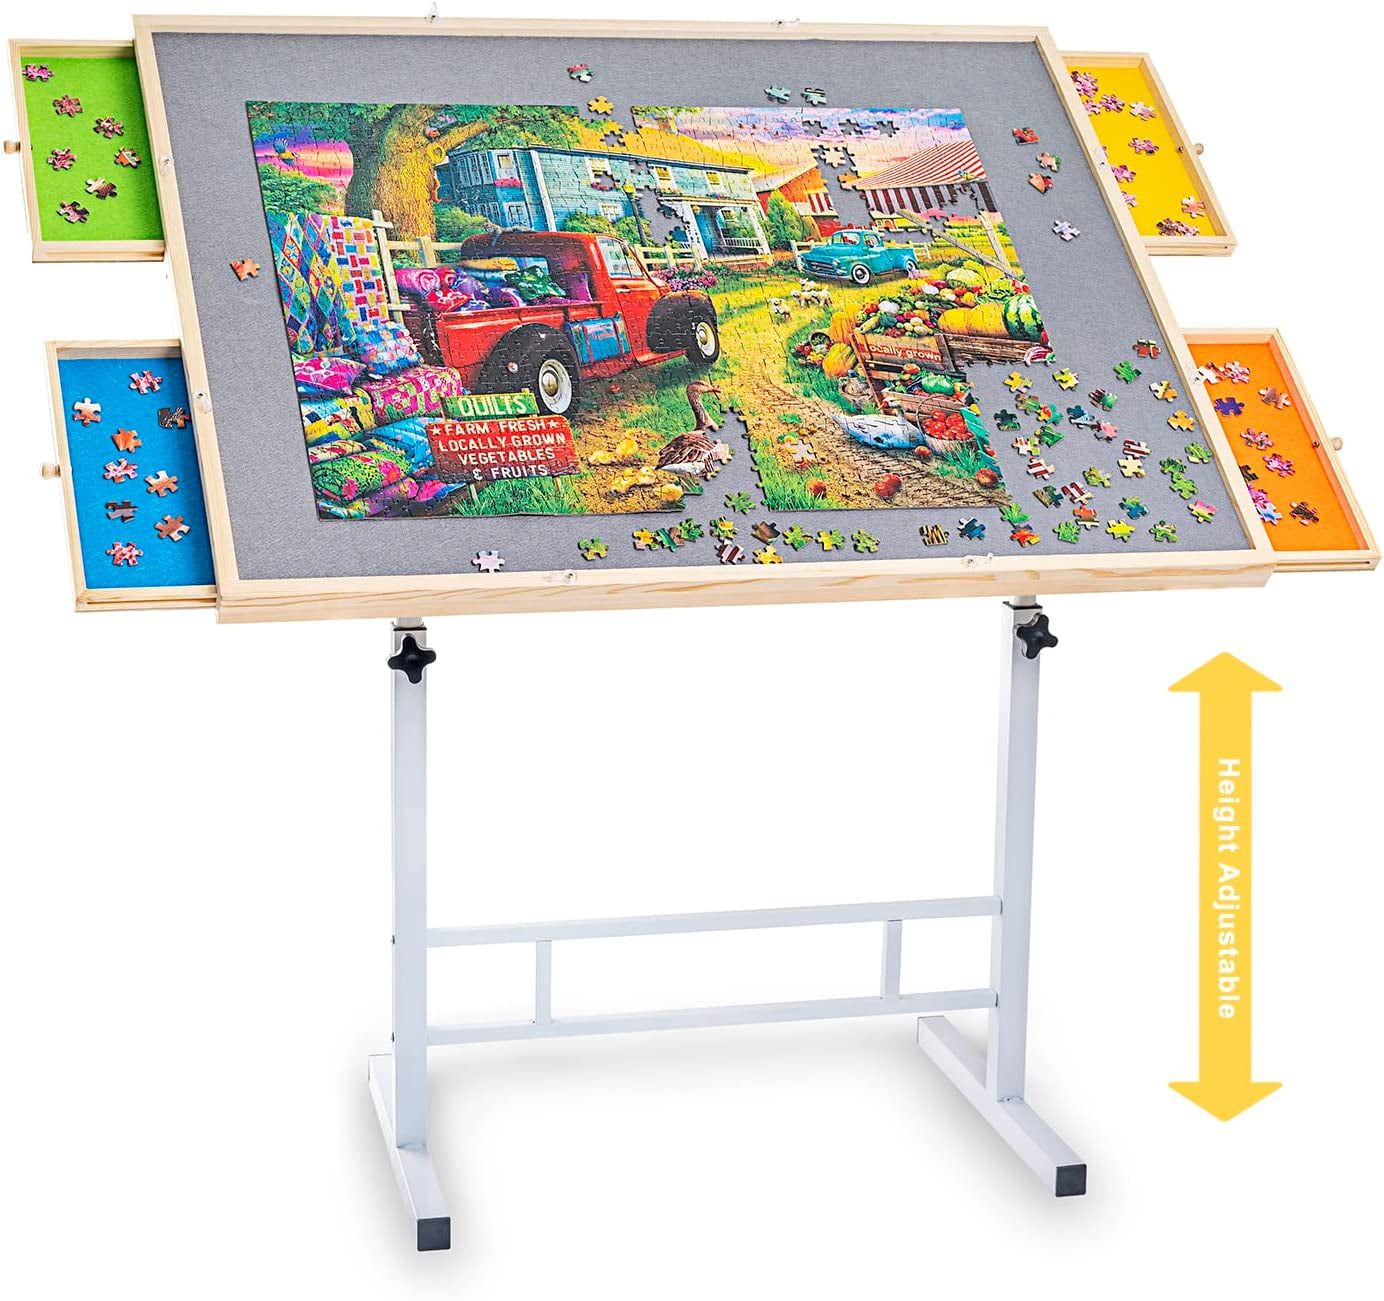 Jigsaw Puzzle Board Easel - 26x35in Puzzle and Game Table Topper